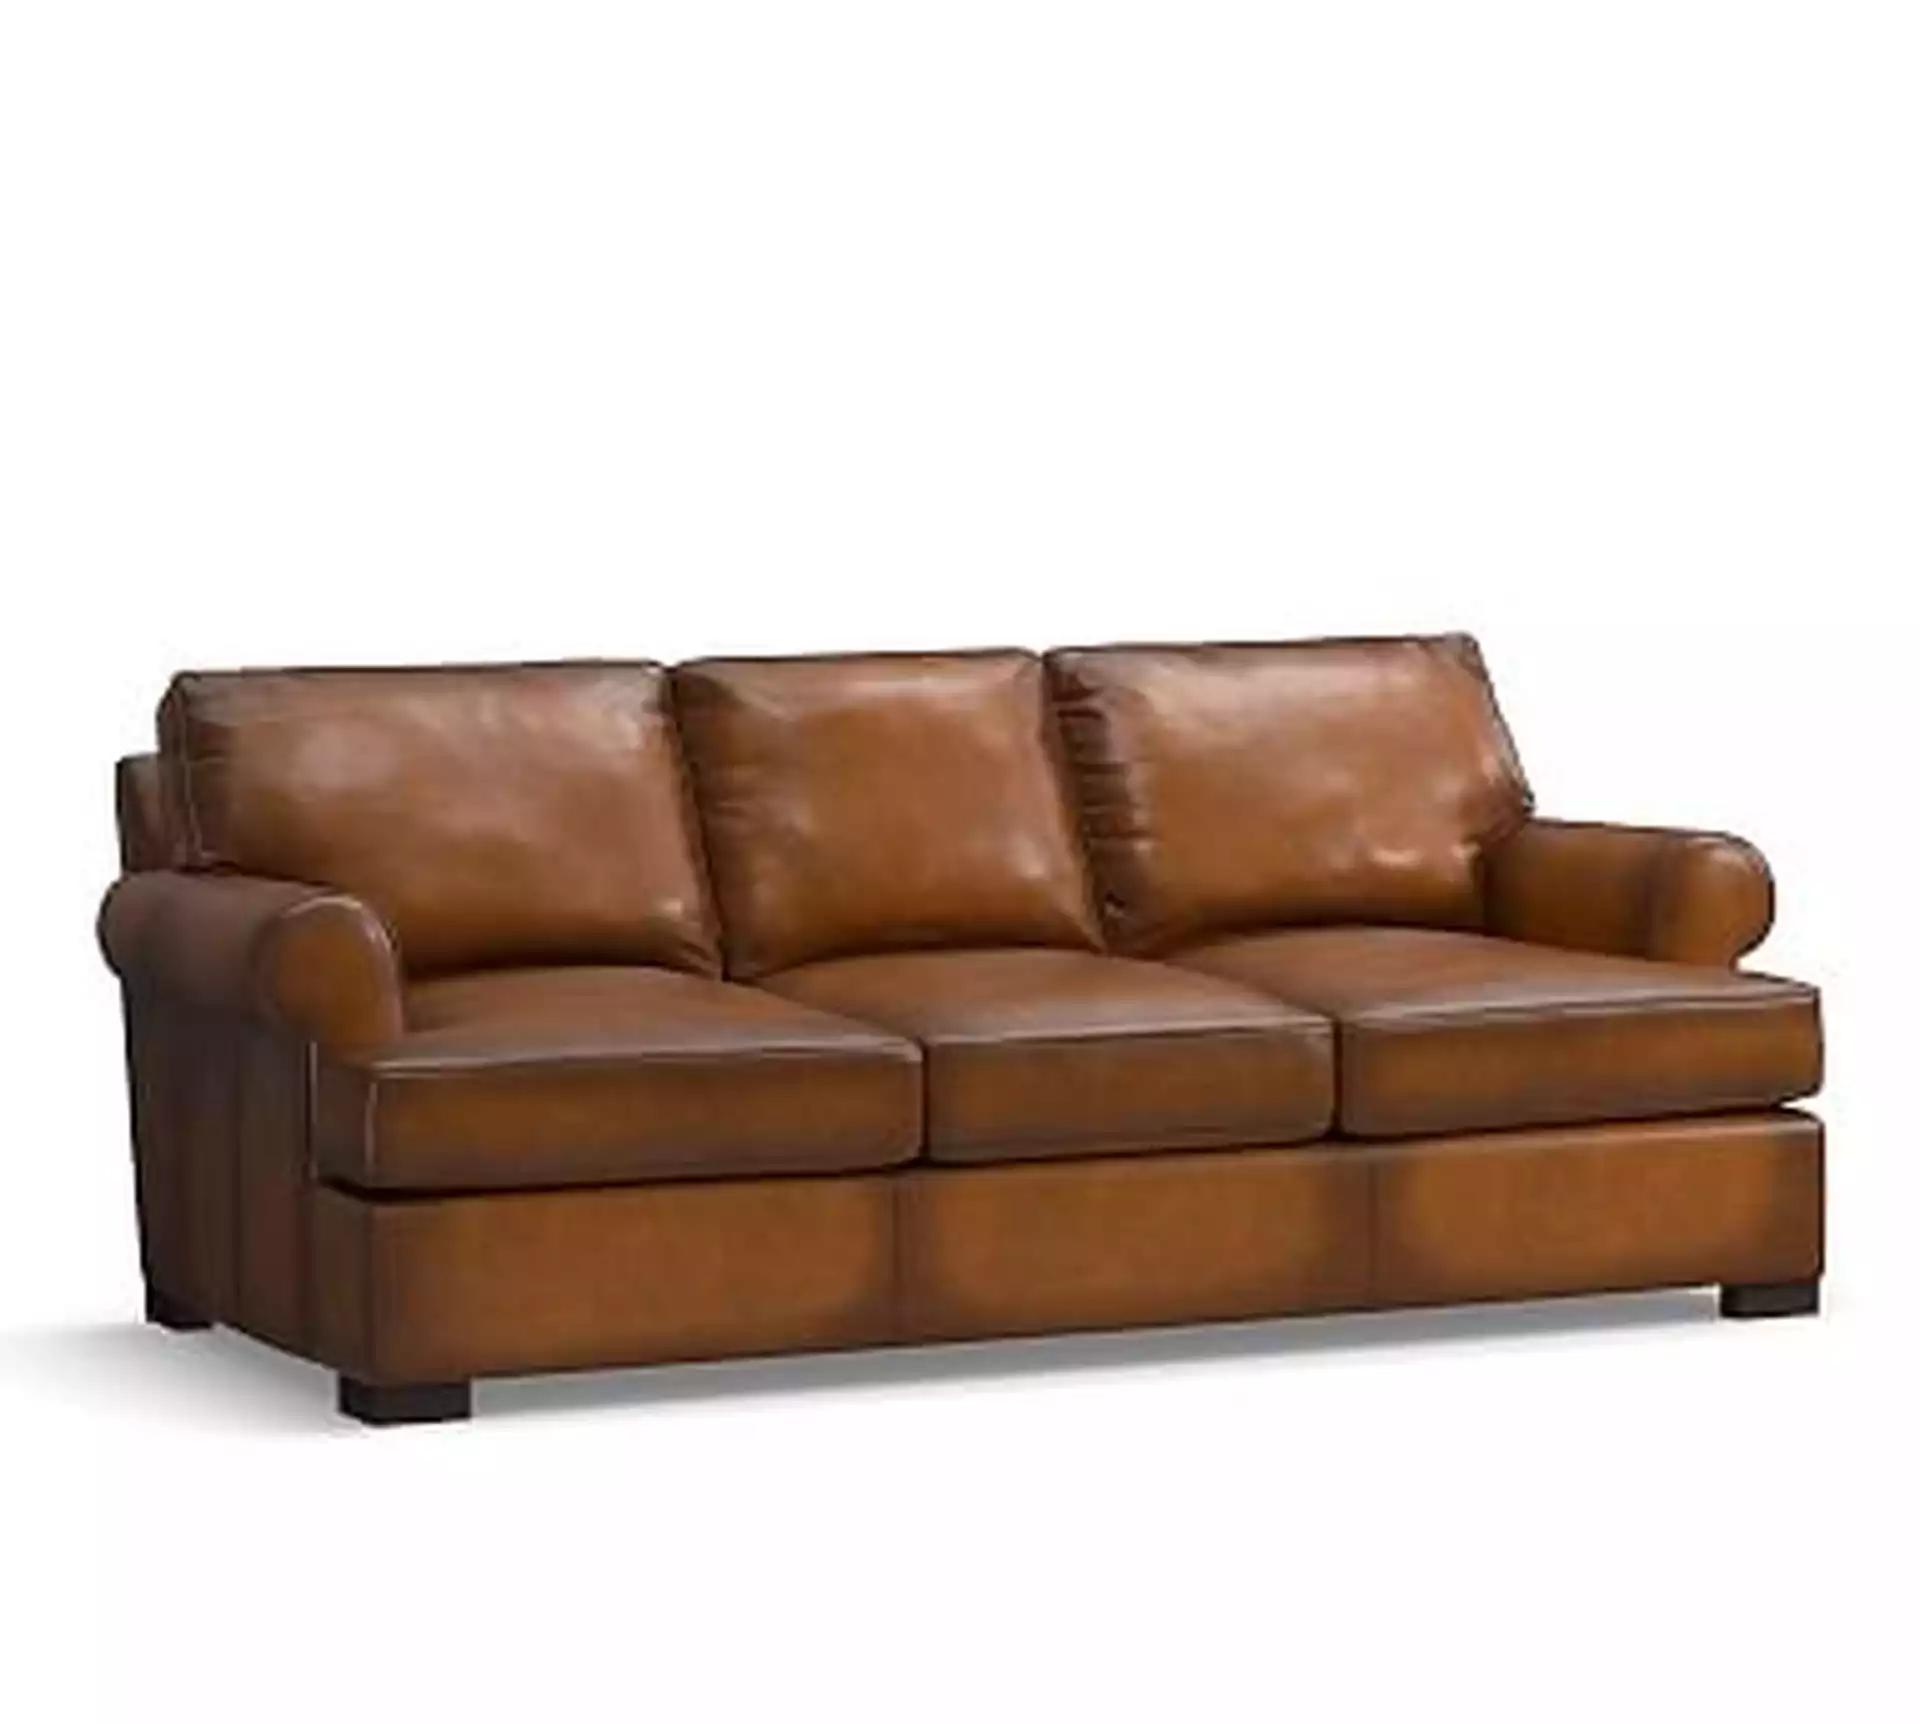 Townsend Roll Arm Leather Sofa, Polyester Wrapped Cushions, Leather Burnished Bourbon